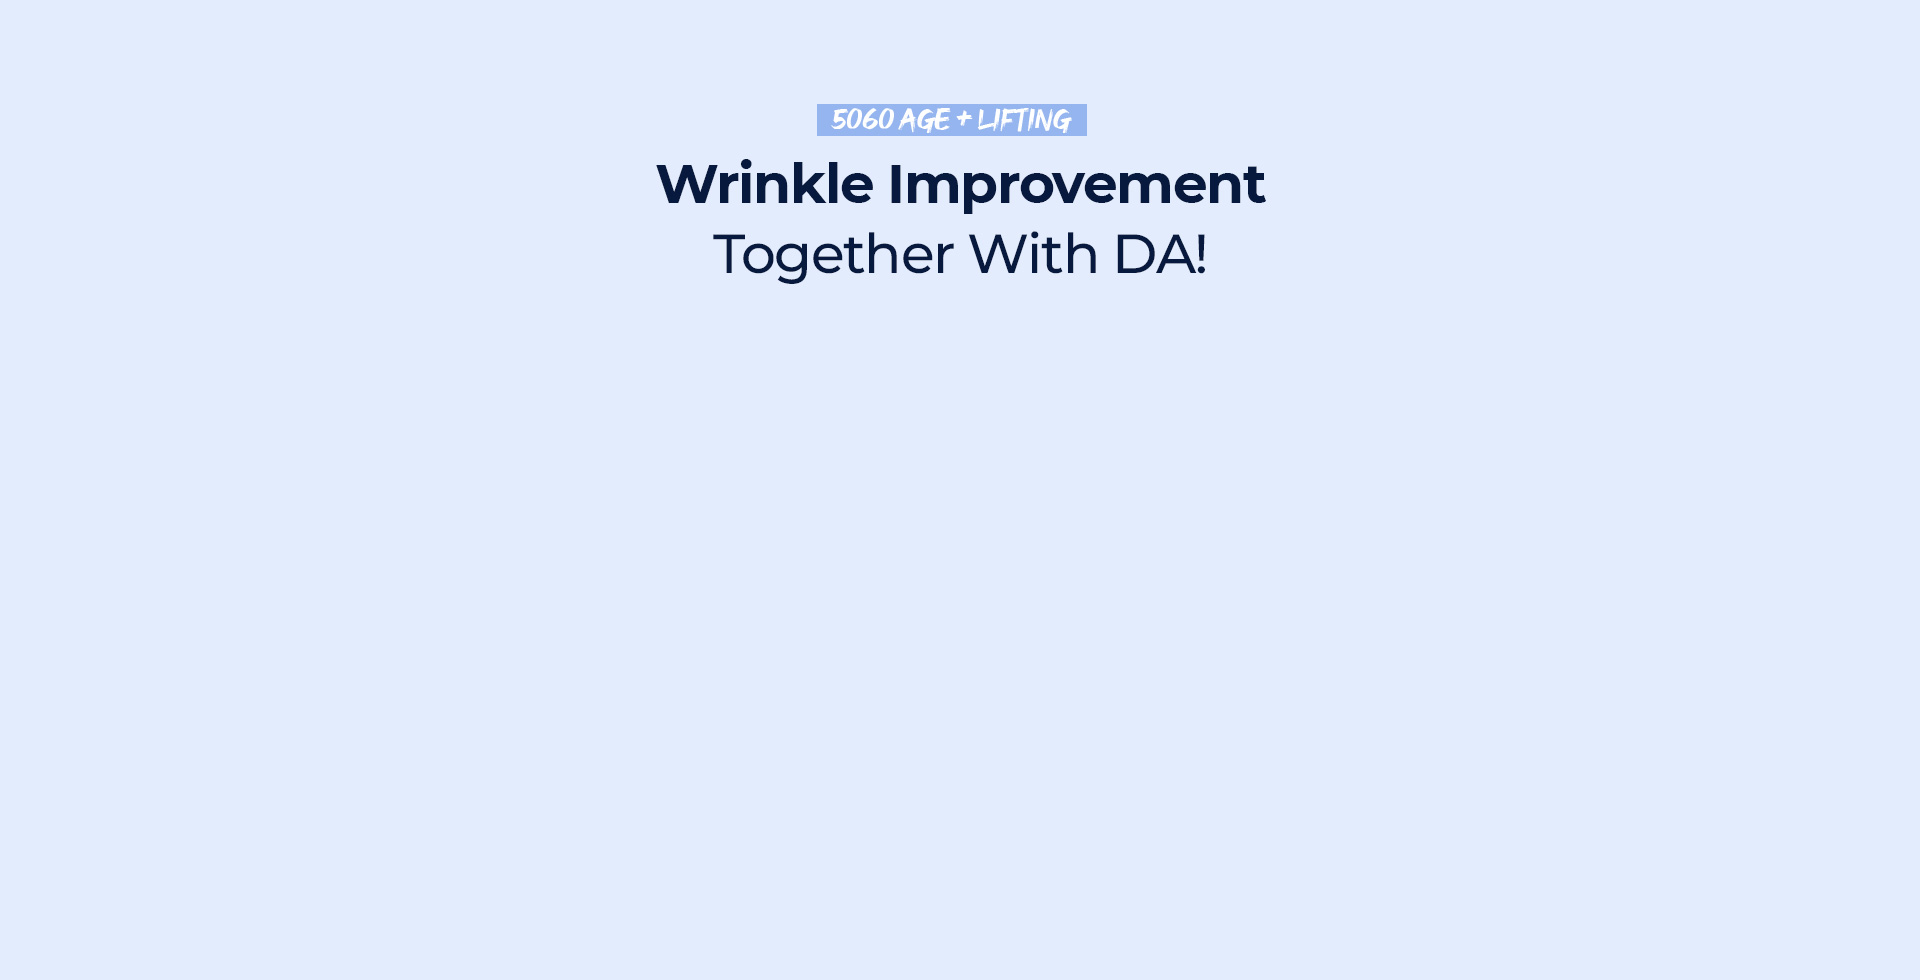 Wrinkle Improvement Together With DA!